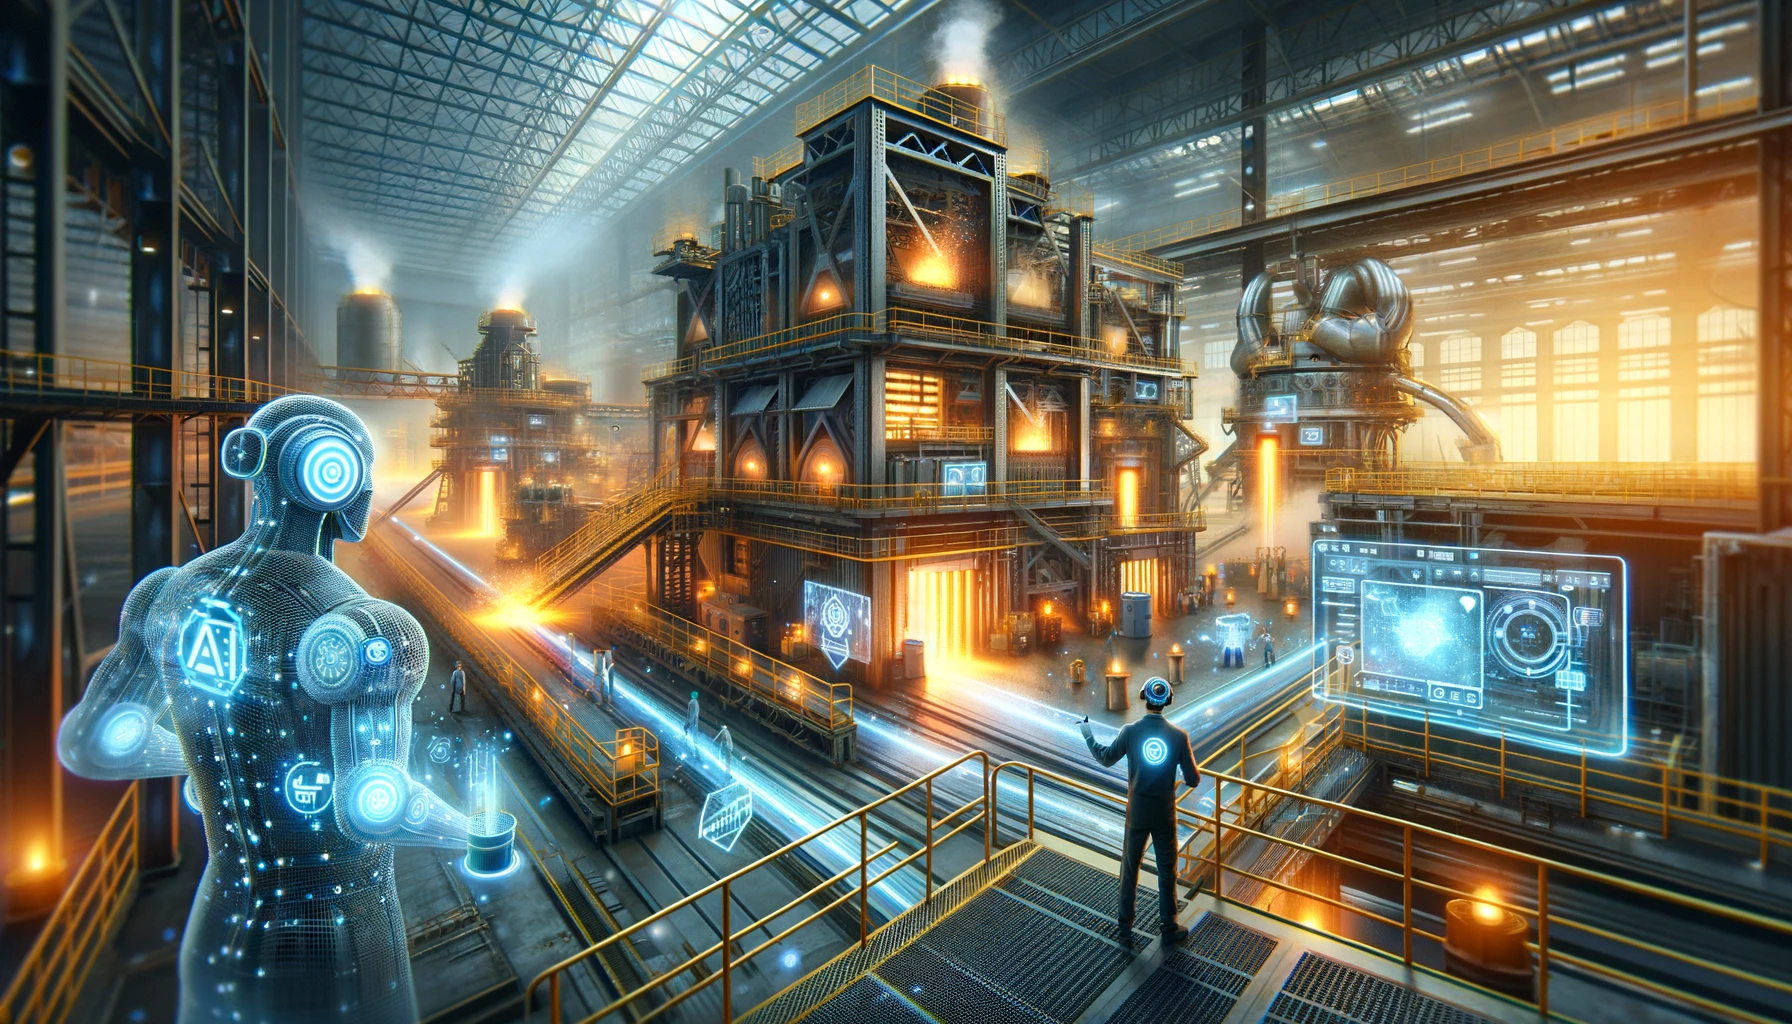 The illustration captures a high-tech industrial environment where workers, equipped with AI-driven gadgets, oversee automated metal production processes. The factory setting is depicted with glowing furnaces and metallic structures, rendered in warm and cold color tones to enhance the futuristic theme.